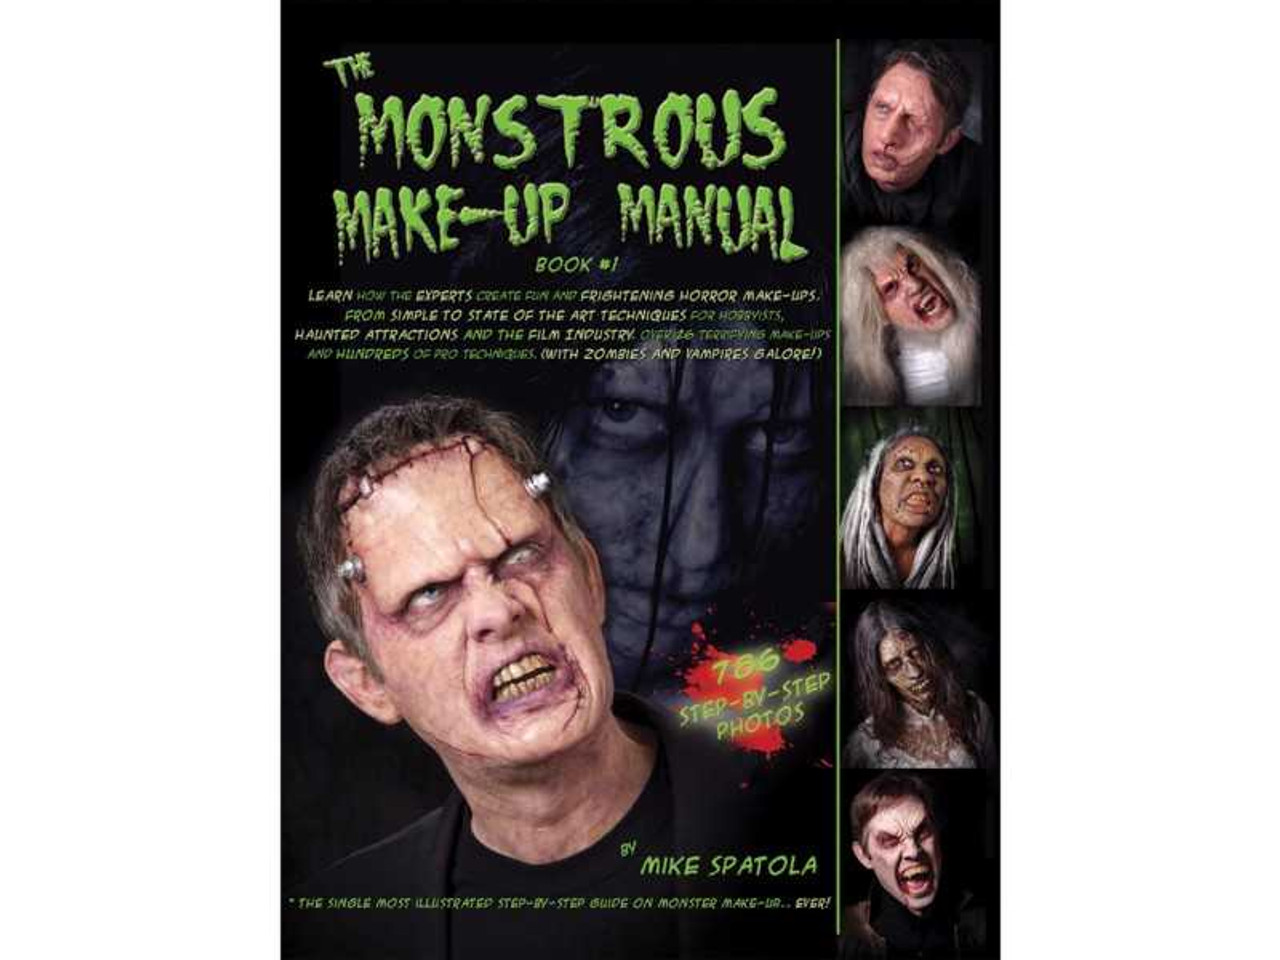 The Monstrous Make-Up Manual Book 1